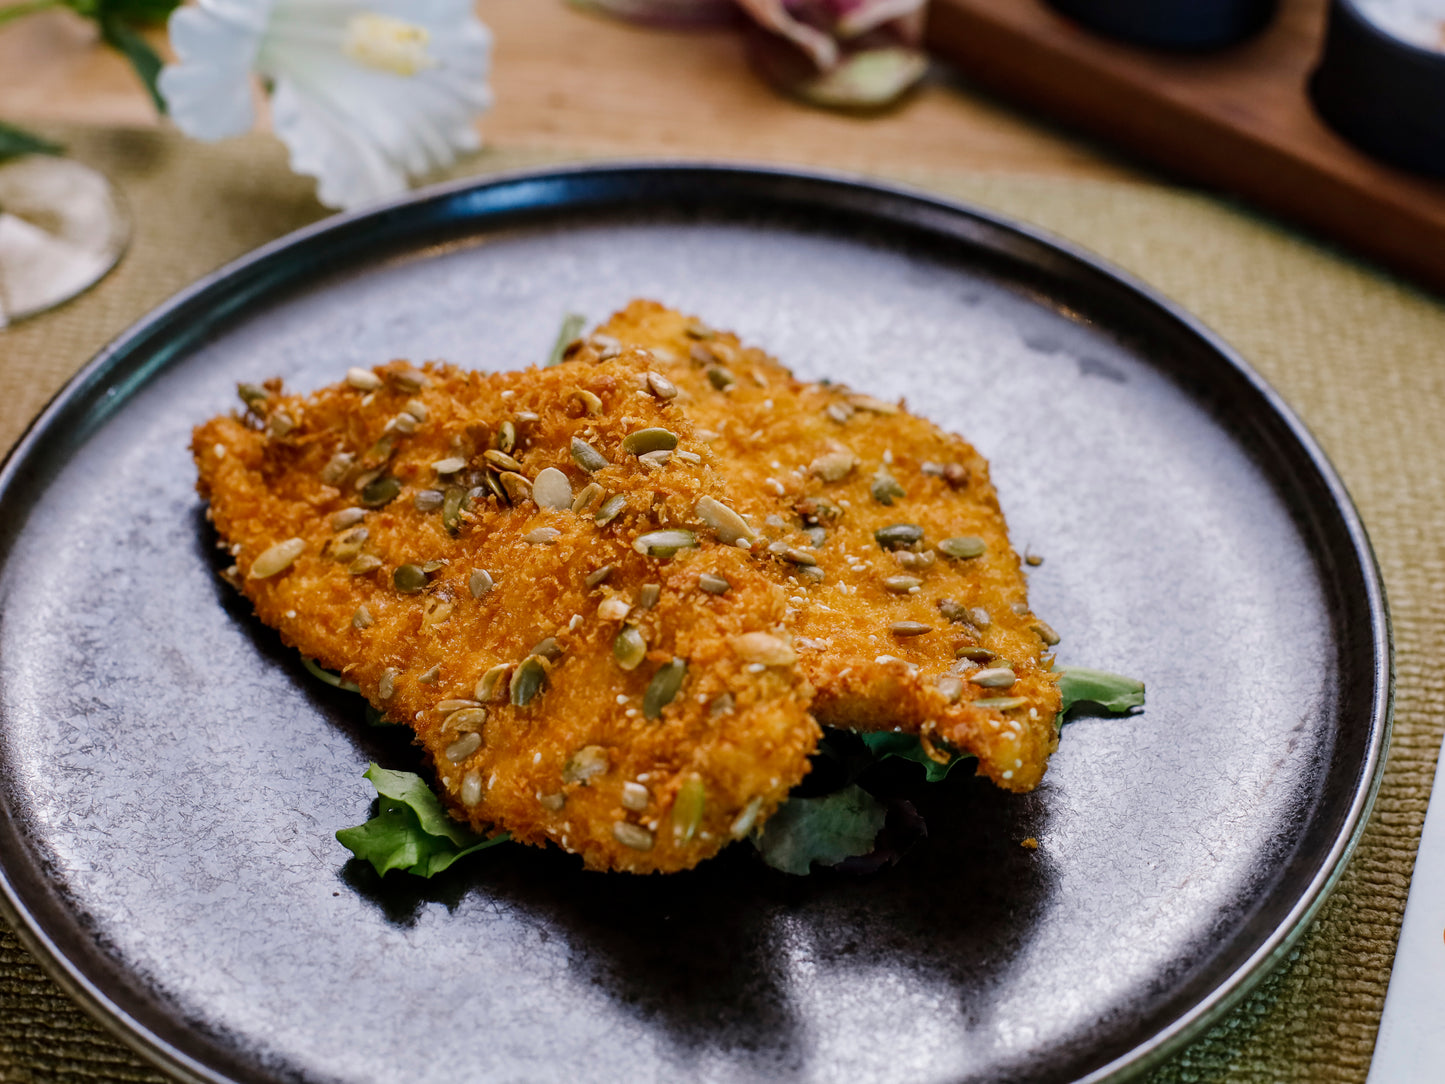 Seeds and Panko Crumbed Chicken 350g